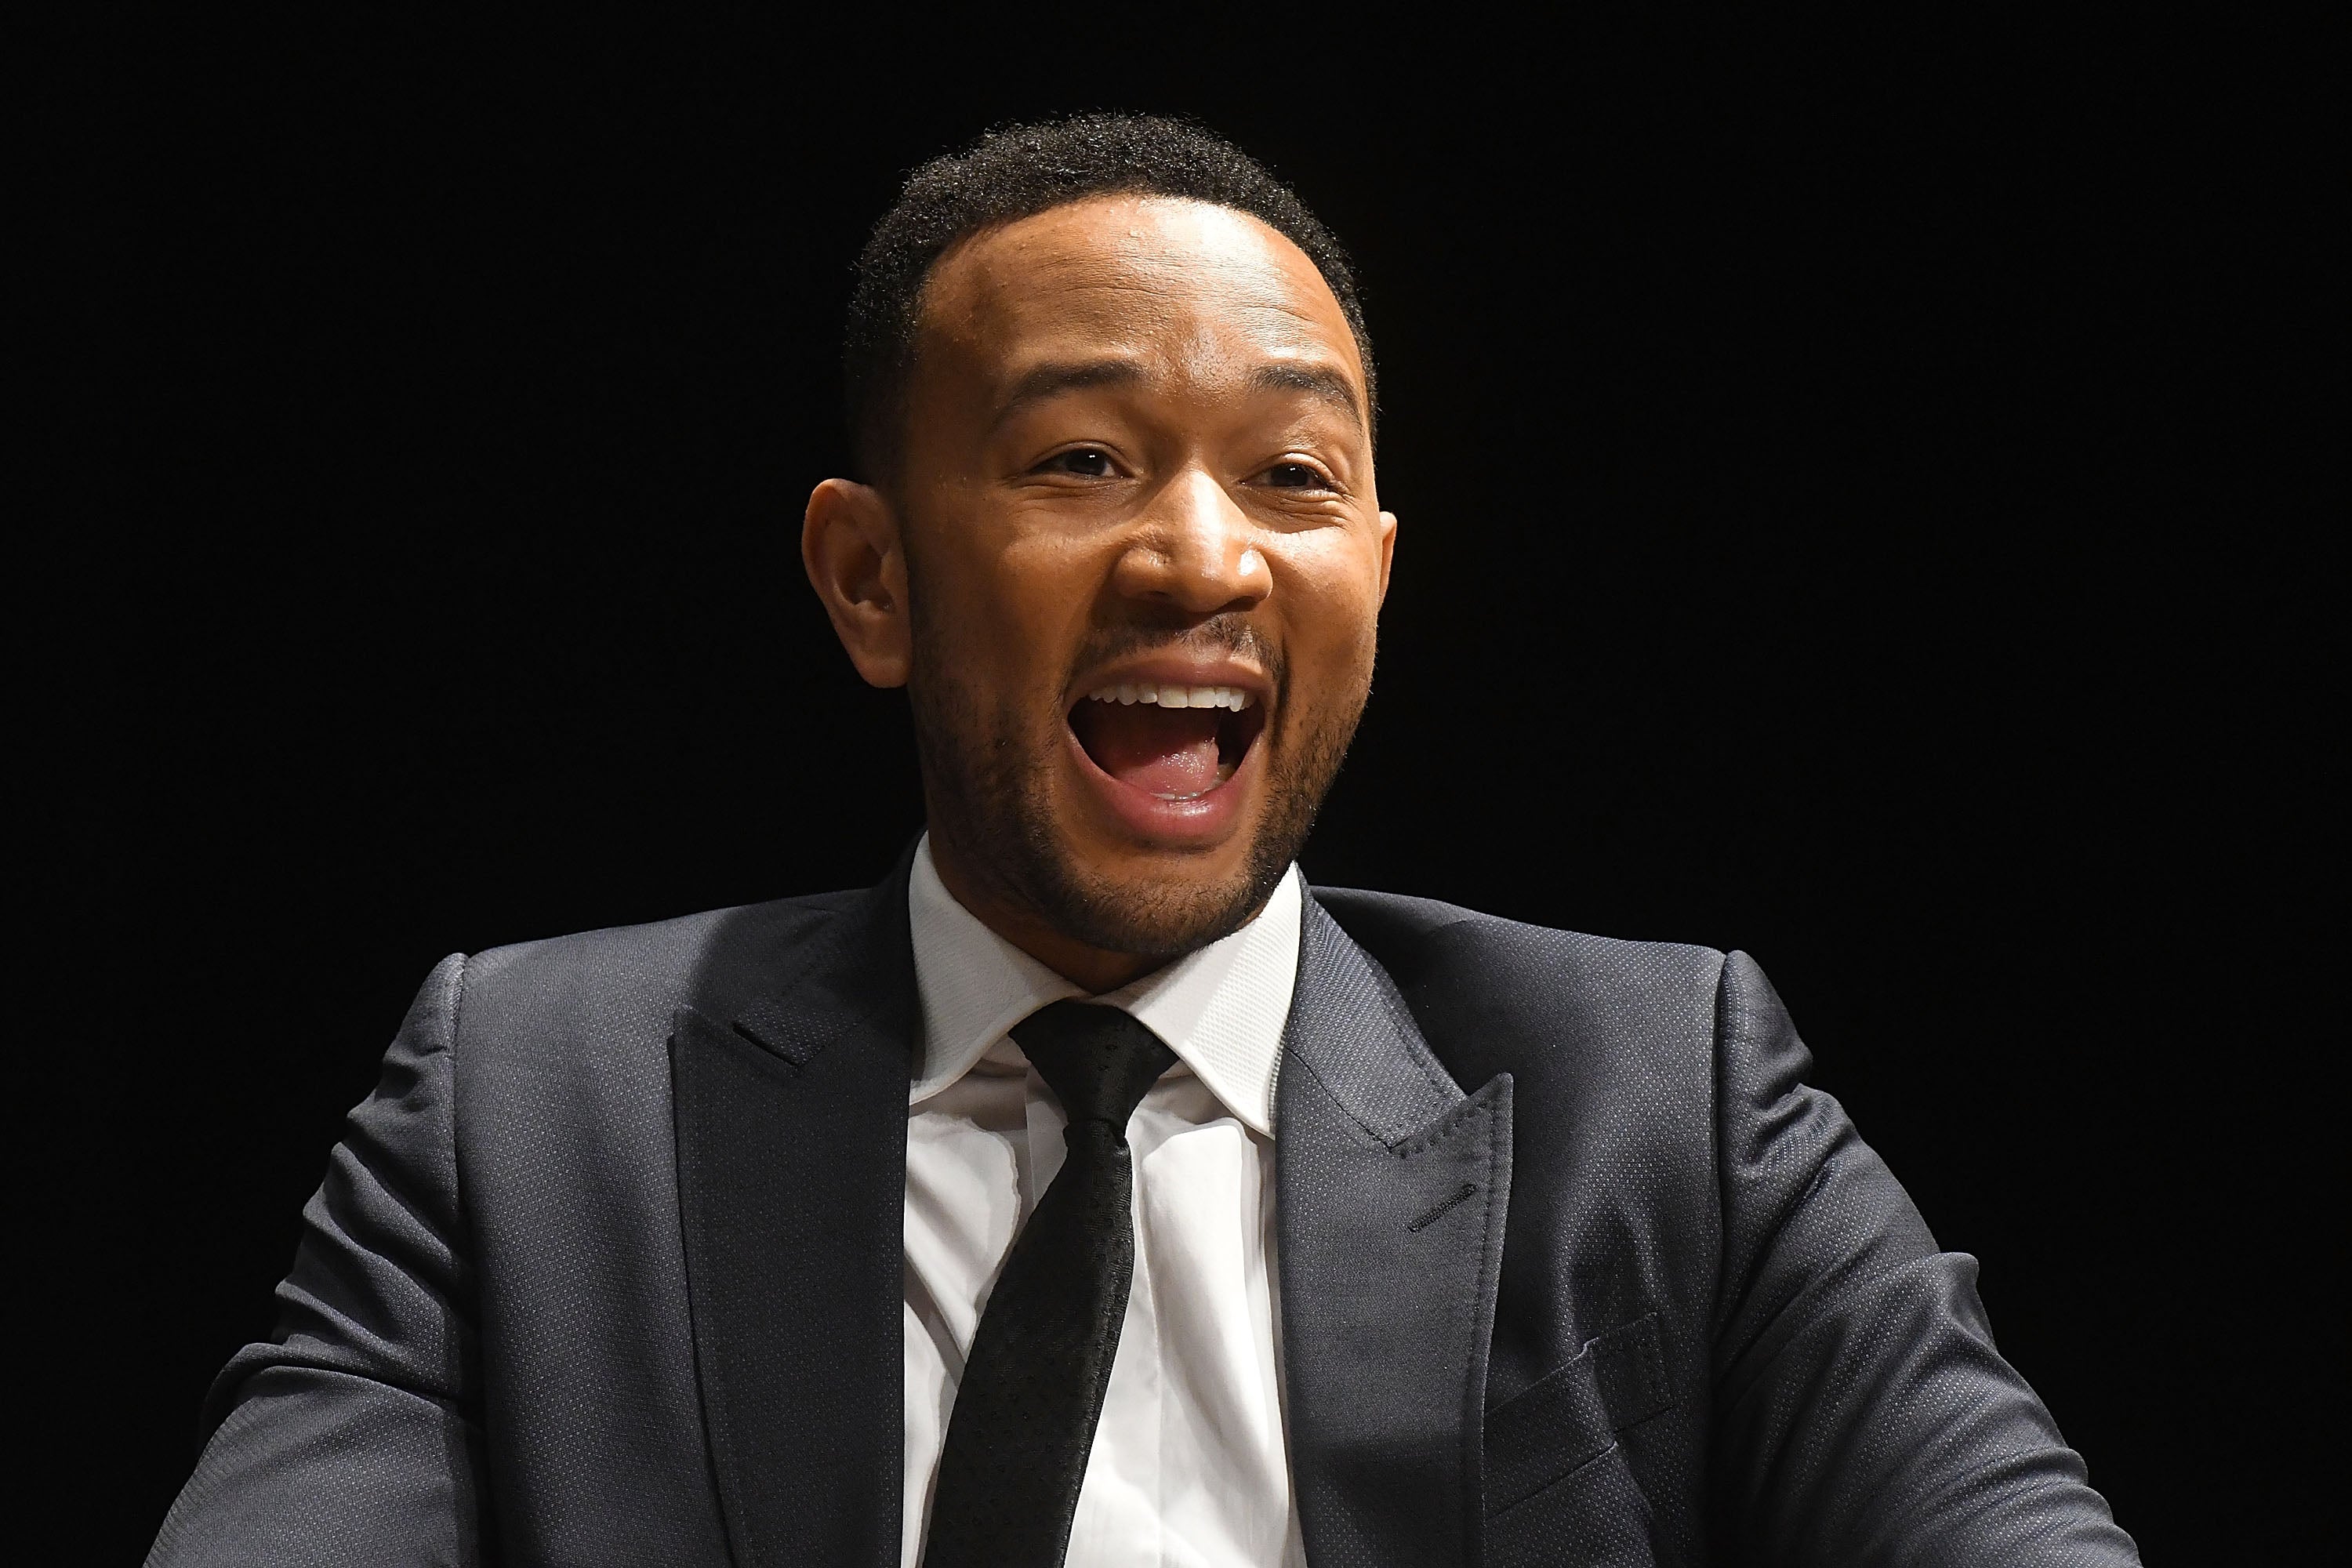 Watch John Legend Be All Humble And What Not About His History-Making EGOT Status